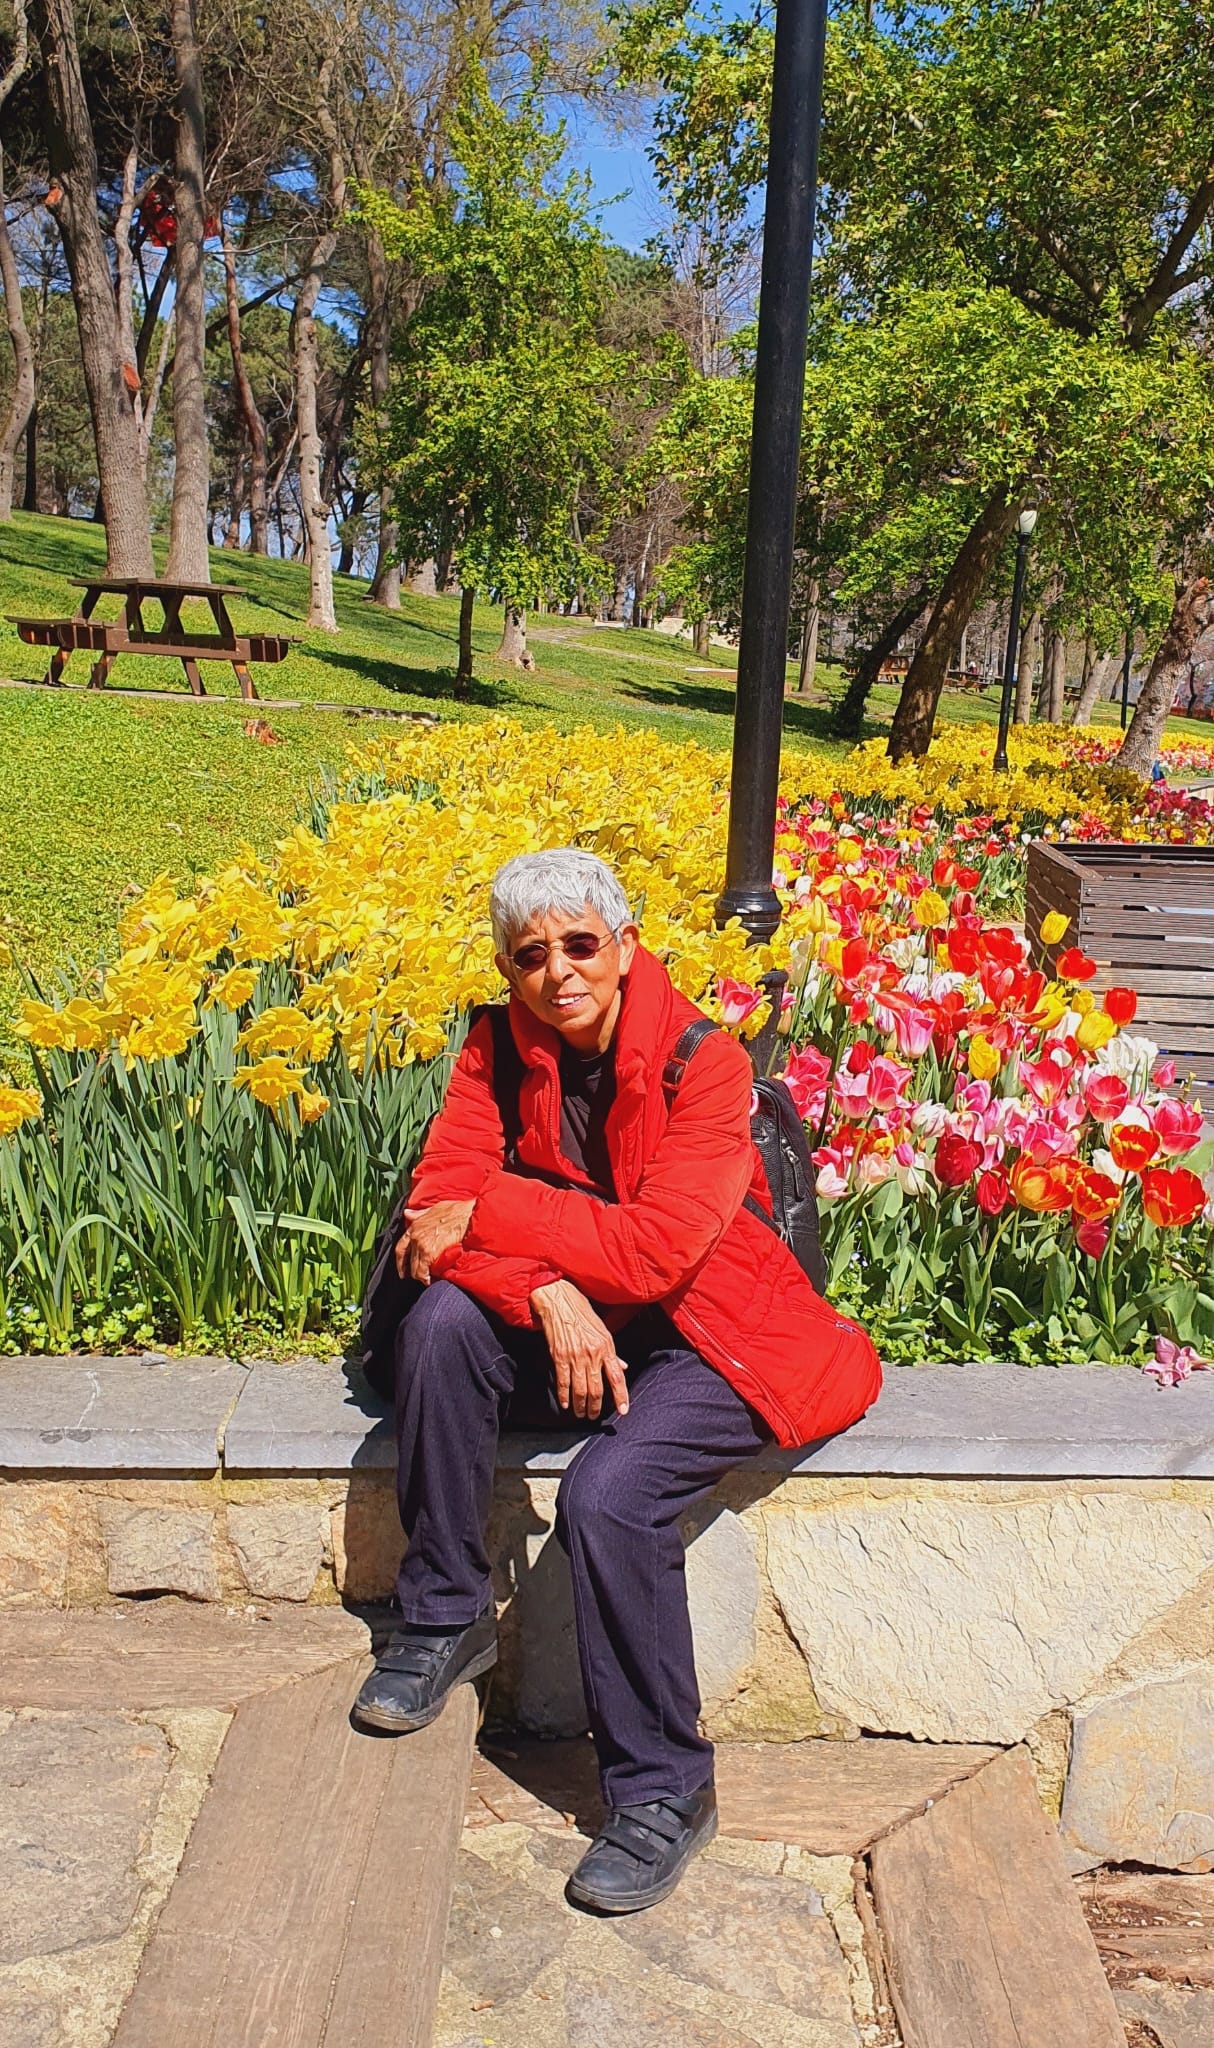 Smiling woman posing in a seated position, with a park behind her and a long bed of red and yellow tulips.